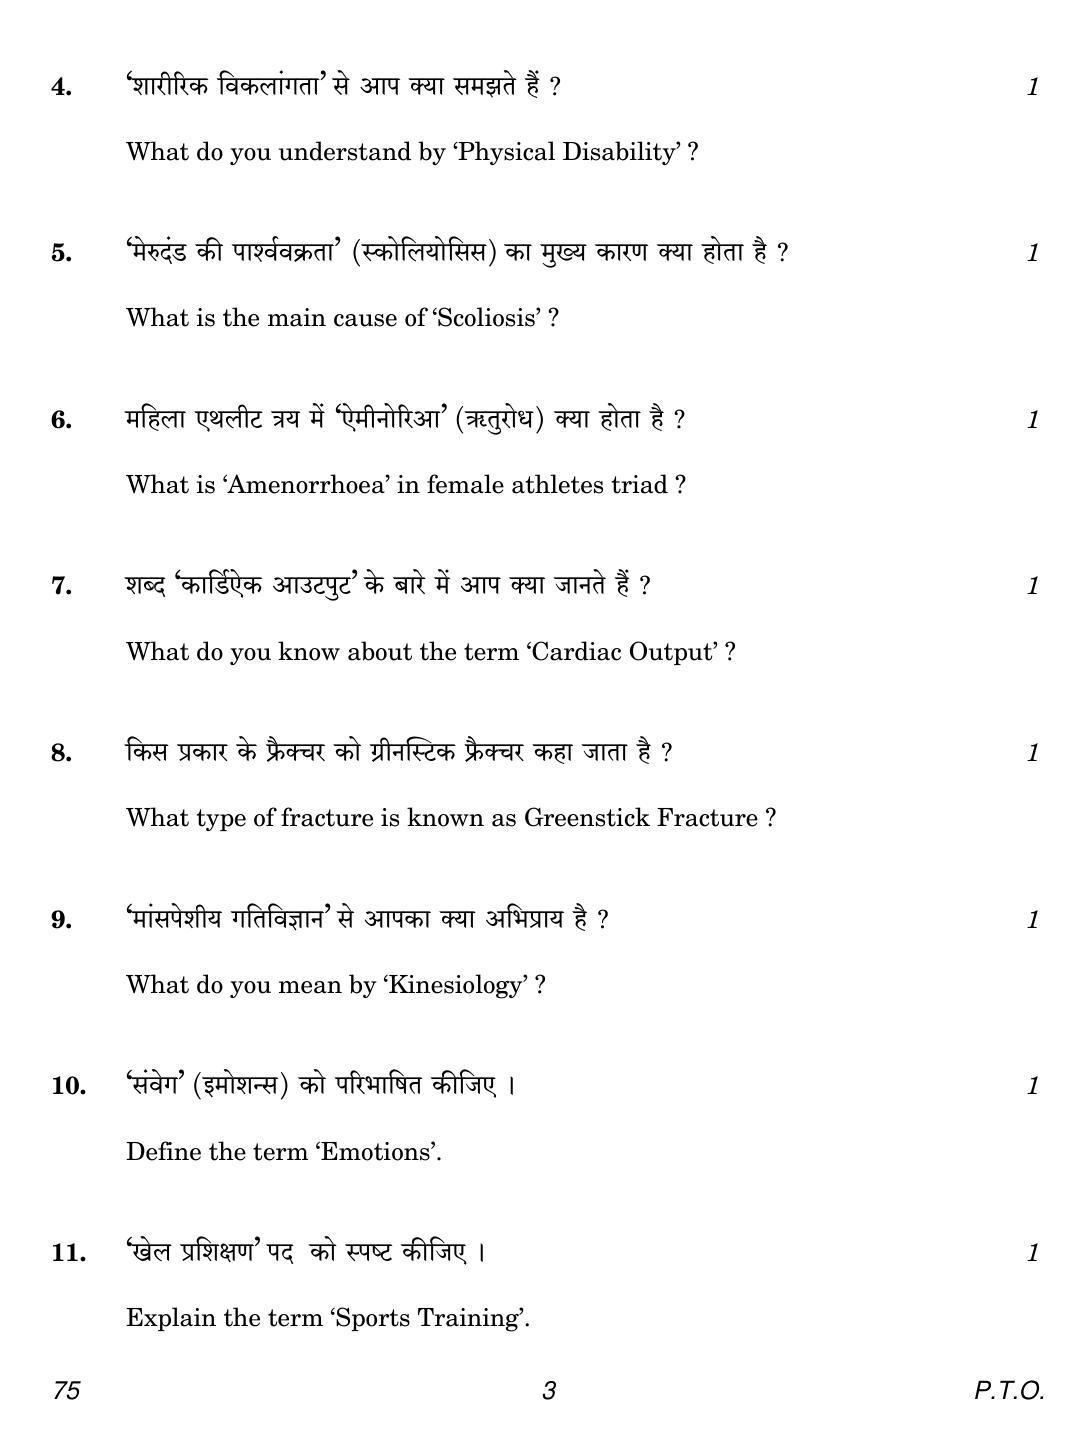 CBSE Class 12 75 Physical Education 2018 Question Paper - Page 3